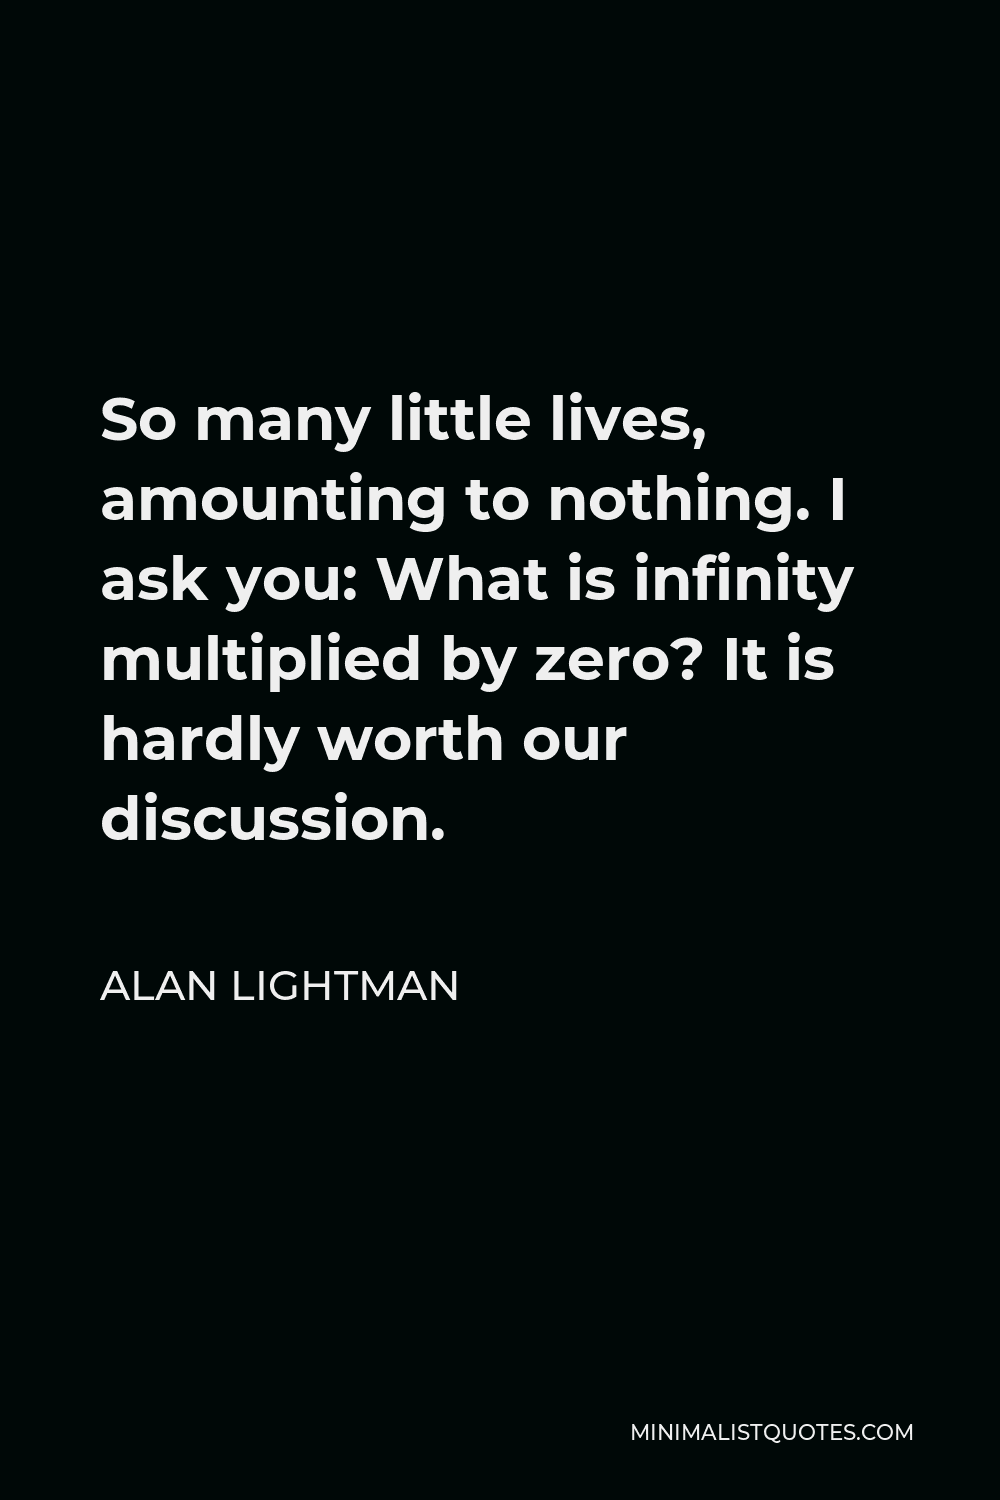 Alan Lightman Quote - So many little lives, amounting to nothing. I ask you: What is infinity multiplied by zero? It is hardly worth our discussion.